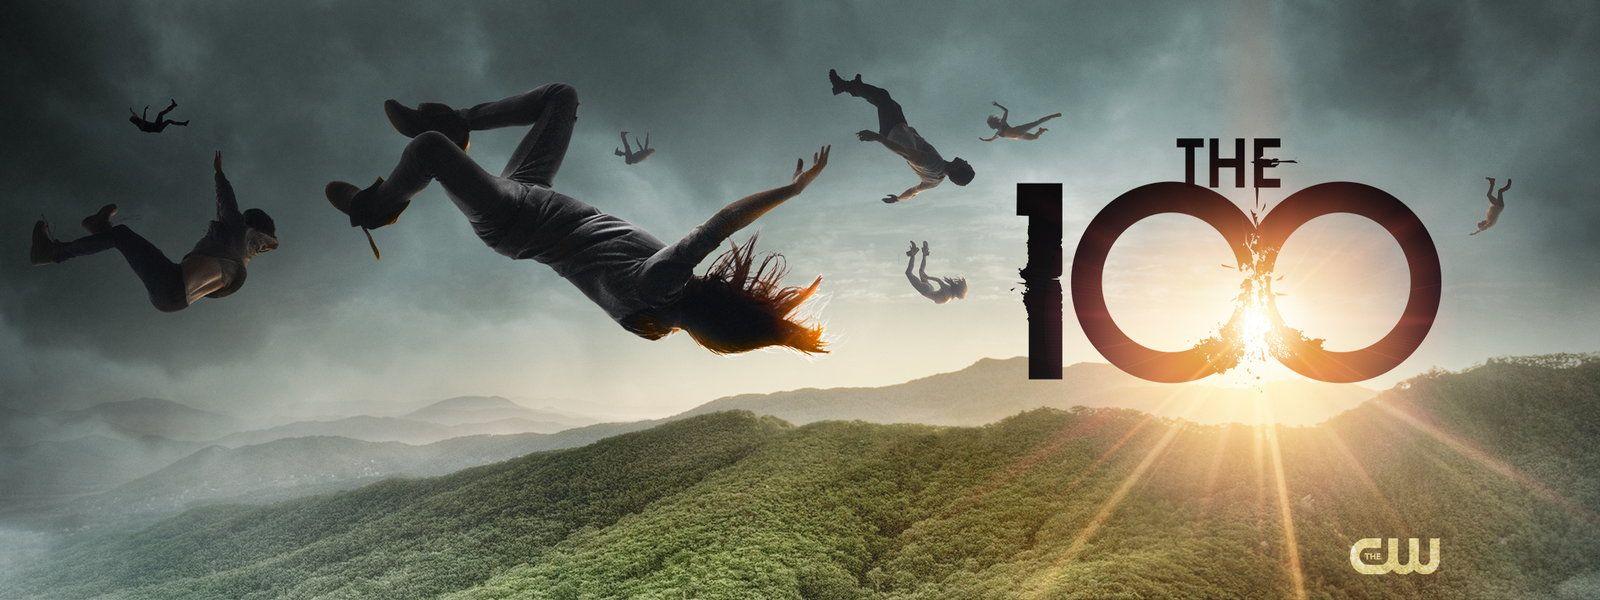 The 100 TV Show Logo - How did you get into the 100? : The100